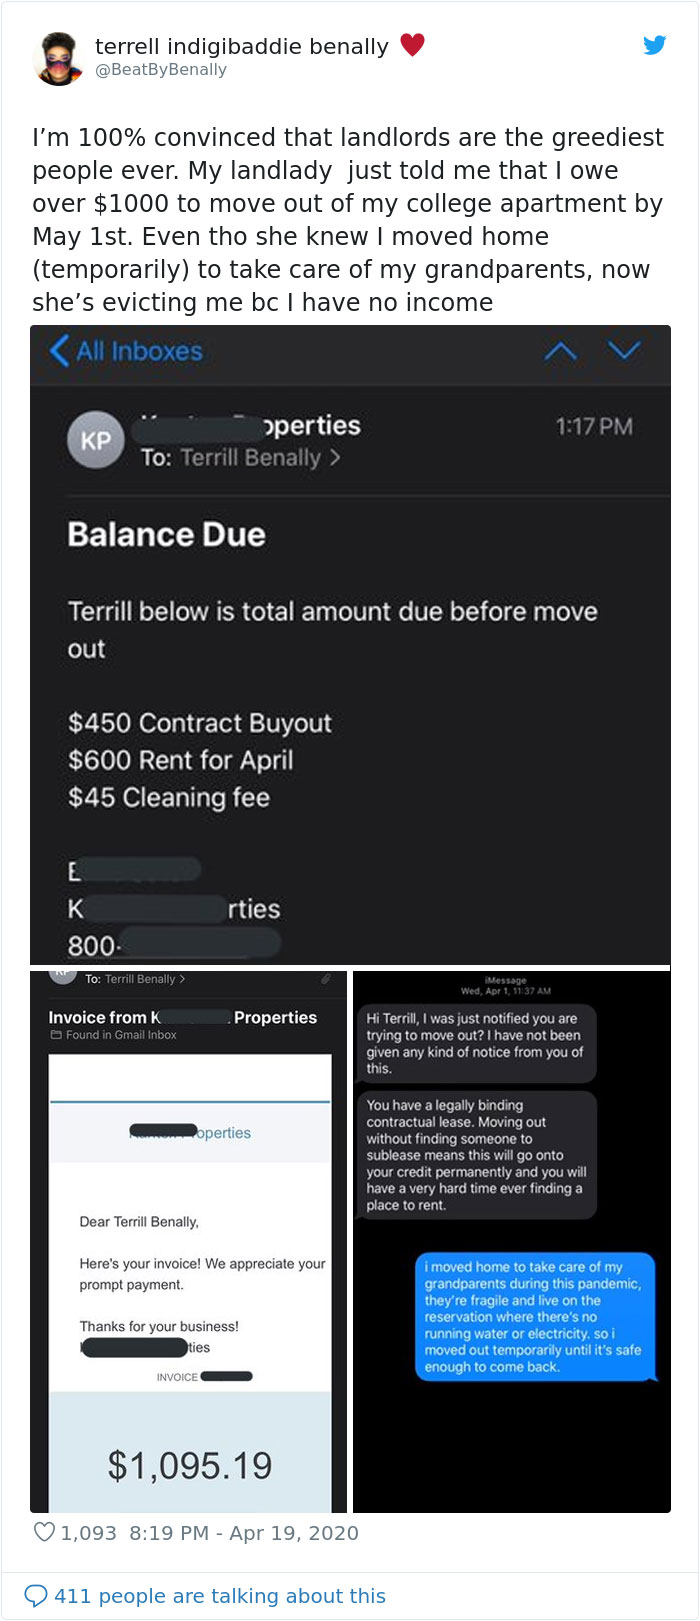 software - terrell indigibaddie benally I'm 100% convinced that landlords are the greediest people ever. My landlady just told me that I owe over $1000 to move out of my college apartment by May 1st. Even tho she knew I moved home temporarily to take care